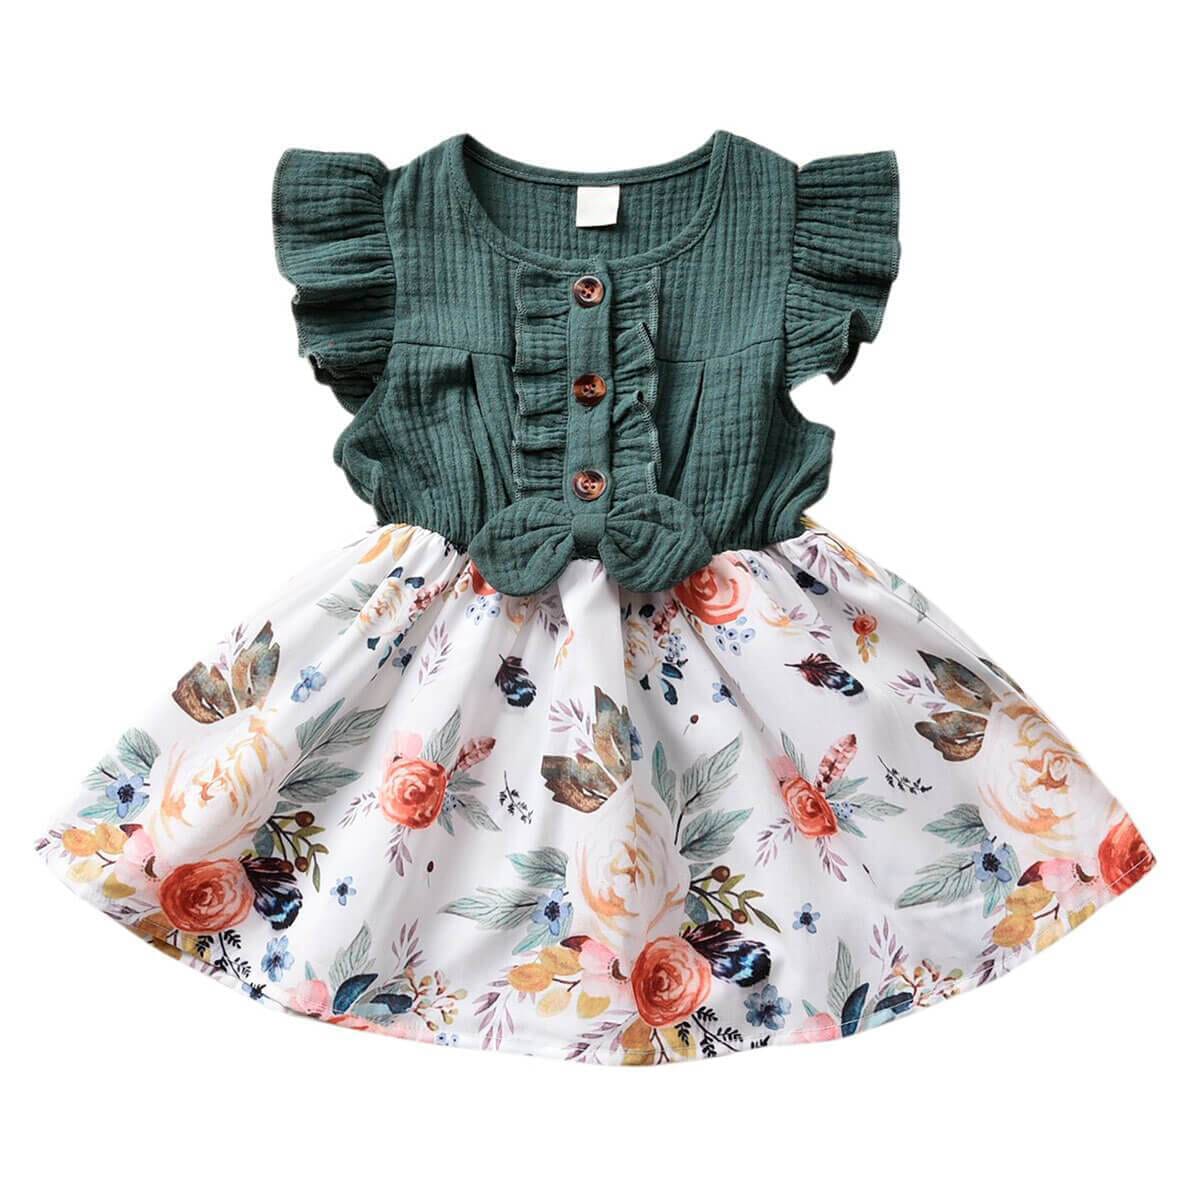 12 Spring and Summer Outfits for Toddler Girls - Baby Chick